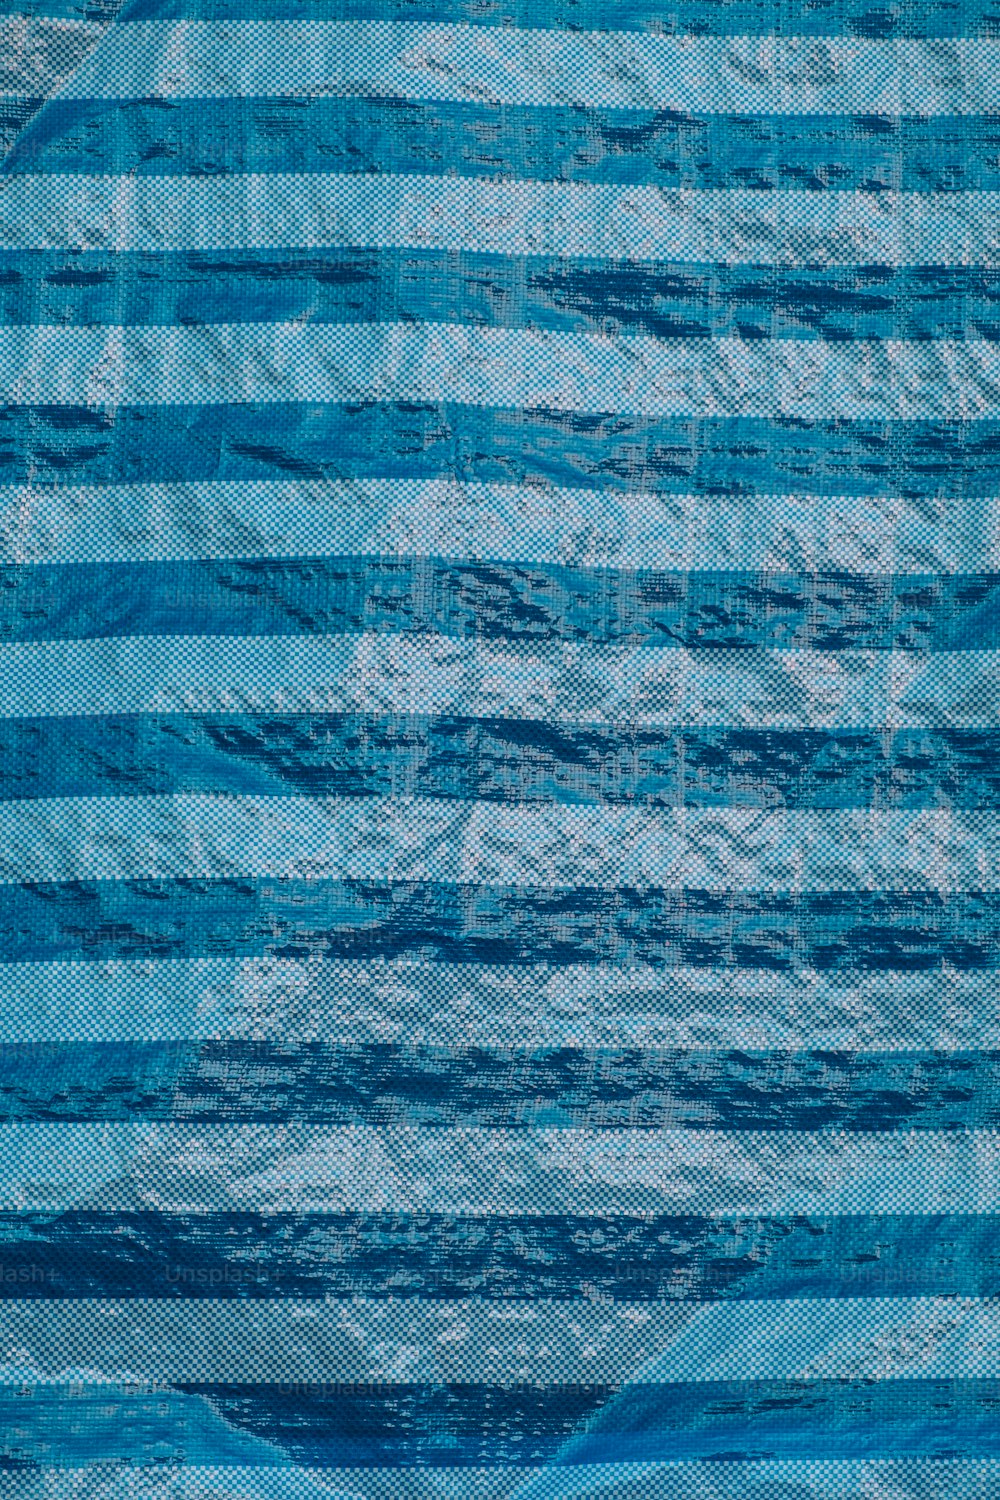 a blue and white striped quilt on a bed